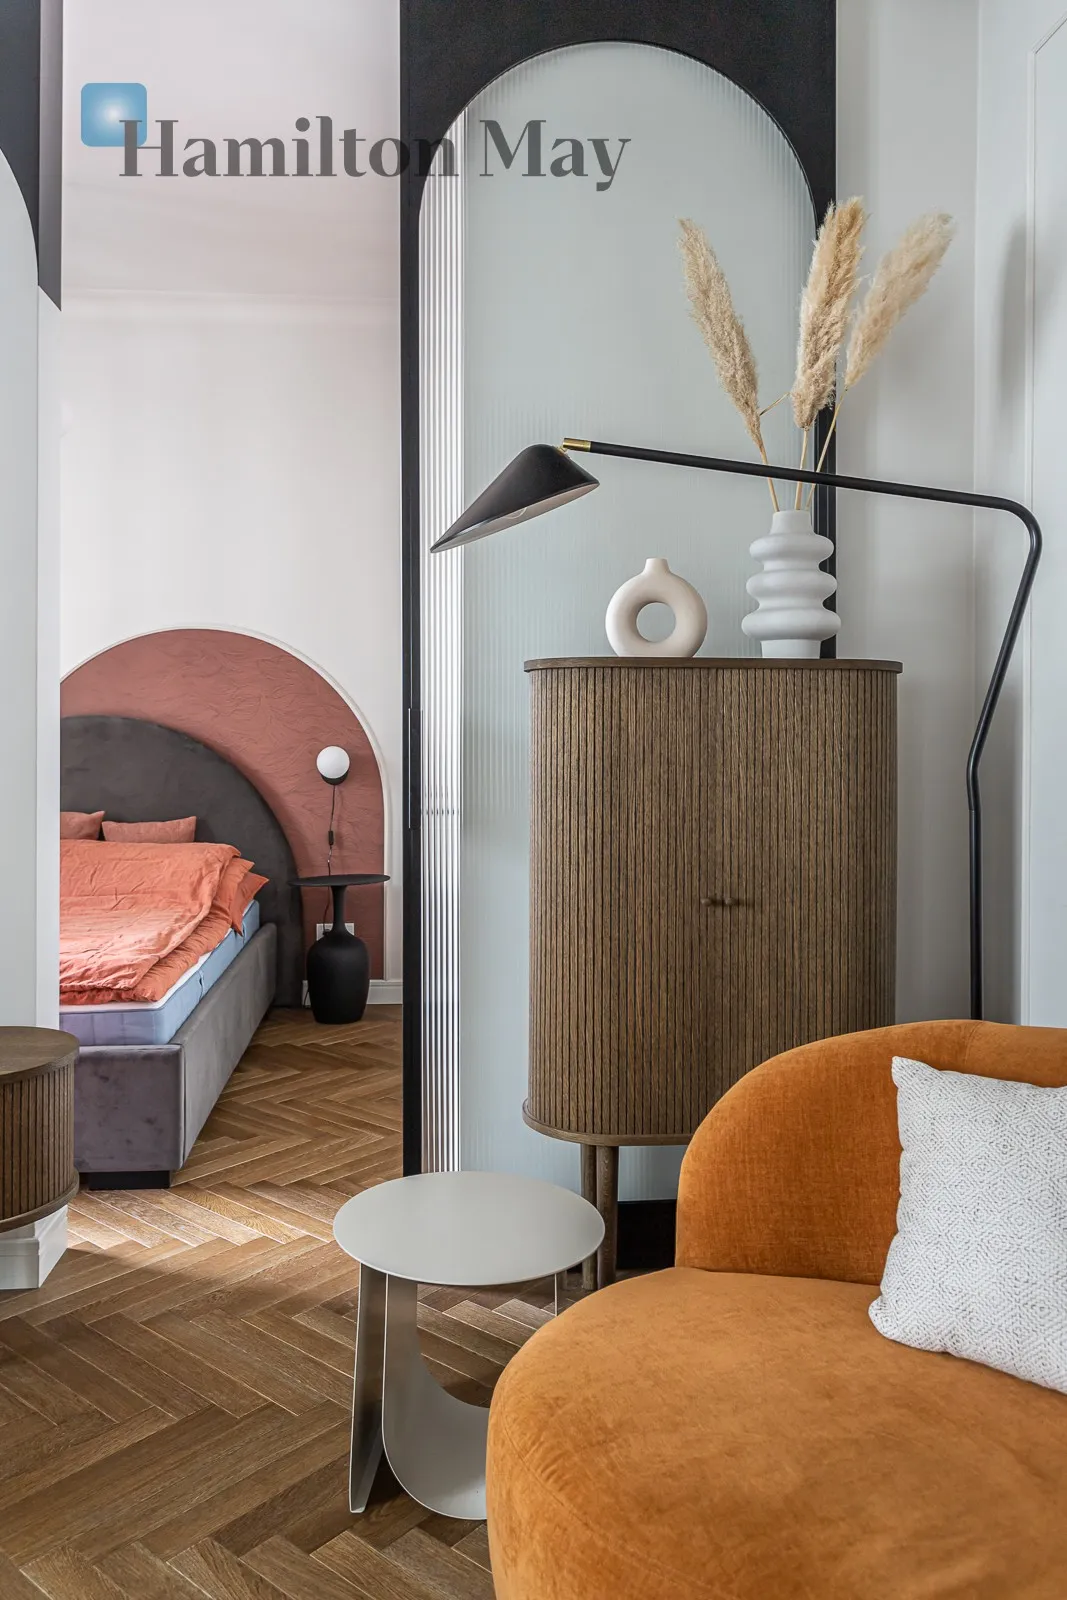 A cozy apartment for rent in a revitalized tenement house in the center of Warsaw